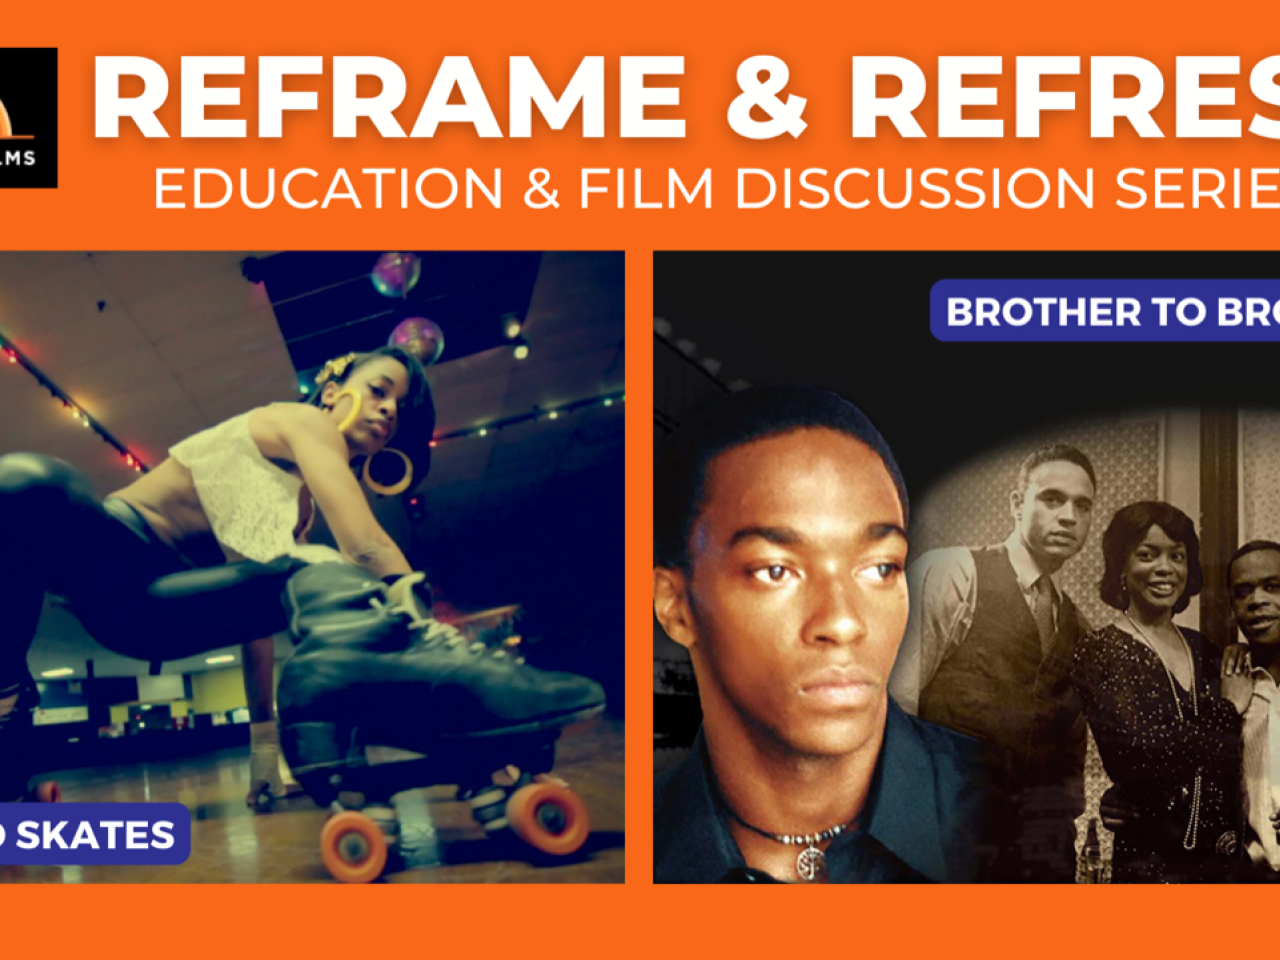 Rectangular box with orange background and New Day Films logo on top left corner. Text reads Reframe & Refresh Education & Film Discussion Series. Left image is of a Black woman squatting down with roller skates from the film United Skates. Right image is of a young Black man’s face next to a black and white photo of 3 Black men and 1 Black woman standing from the film Brother to Brother.